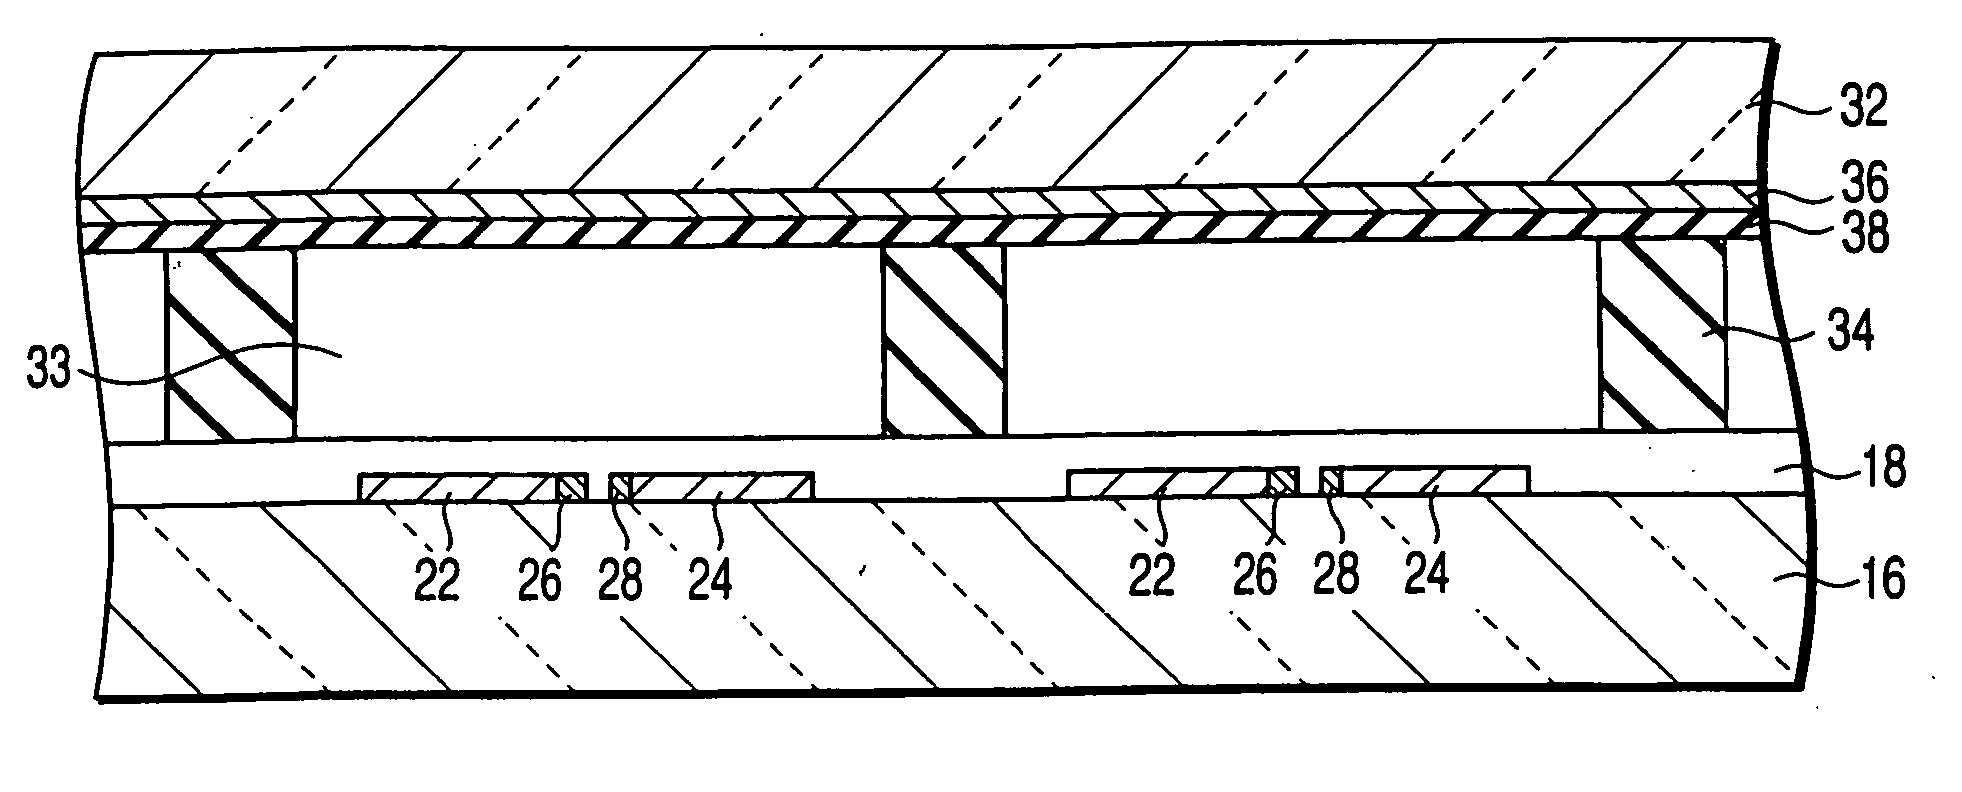 Field emission cold cathode device of lateral type